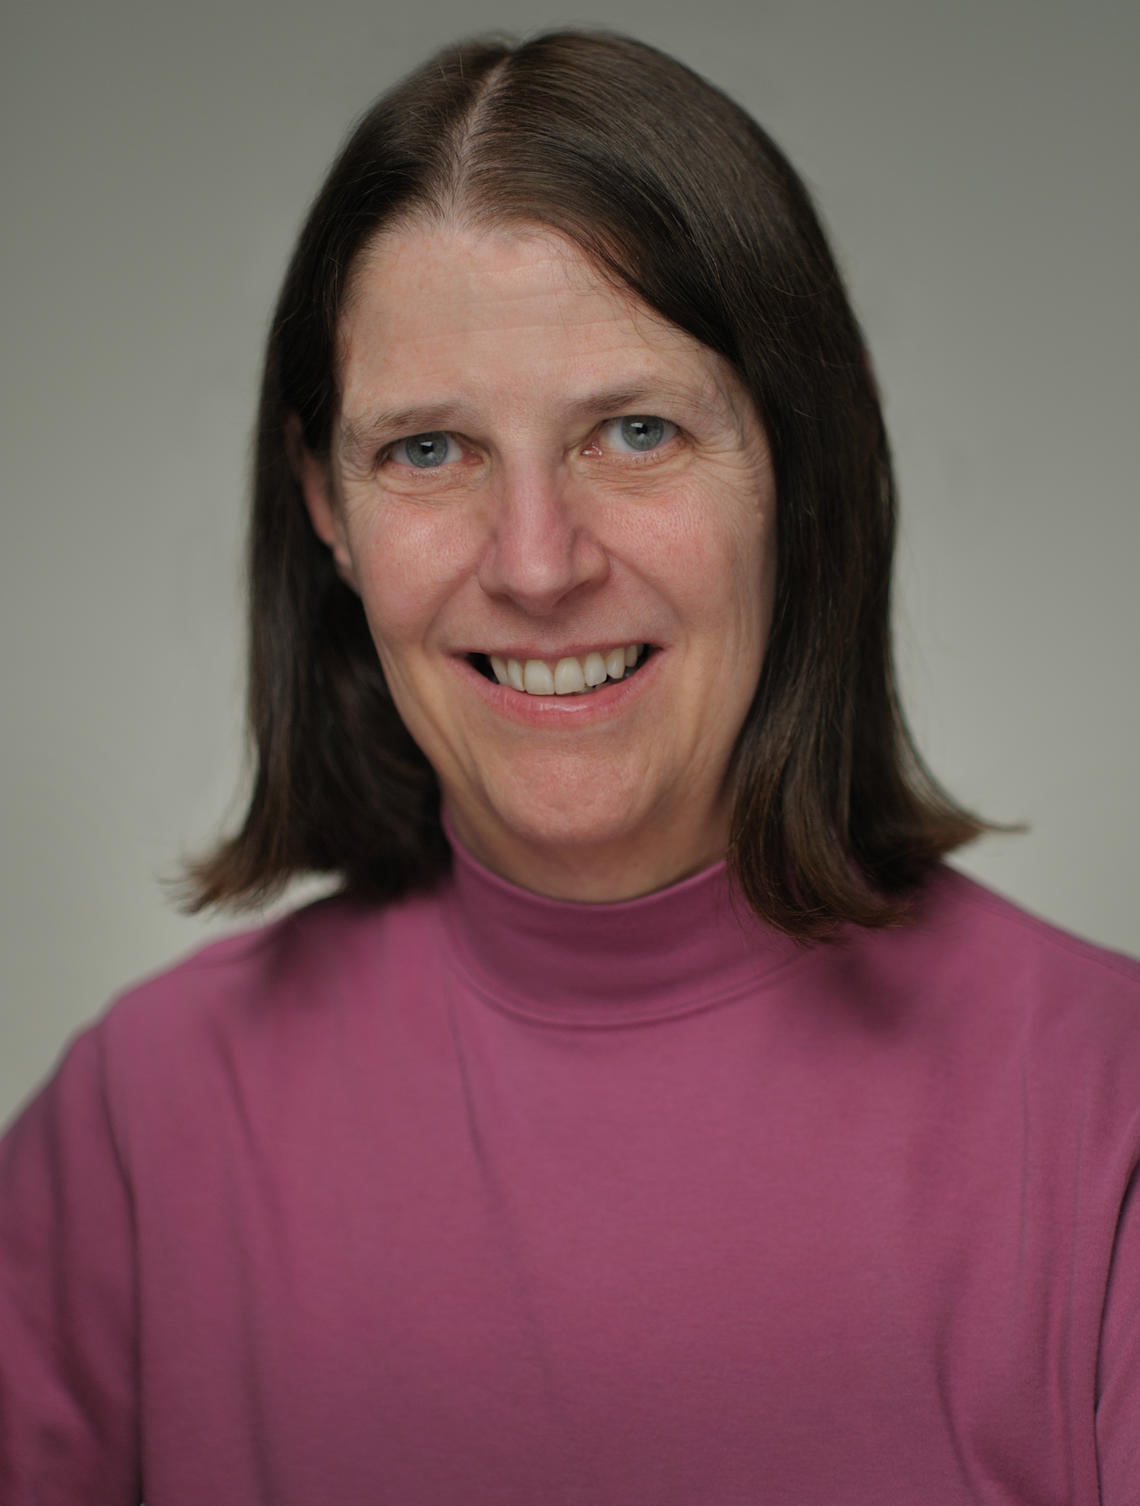 Elizabeth (Tish) Murphy will deliver the E.R. Smith Lecture on April 2 during the Libin Institute’s annual Tine Haworth Cardiovascular Research Day.